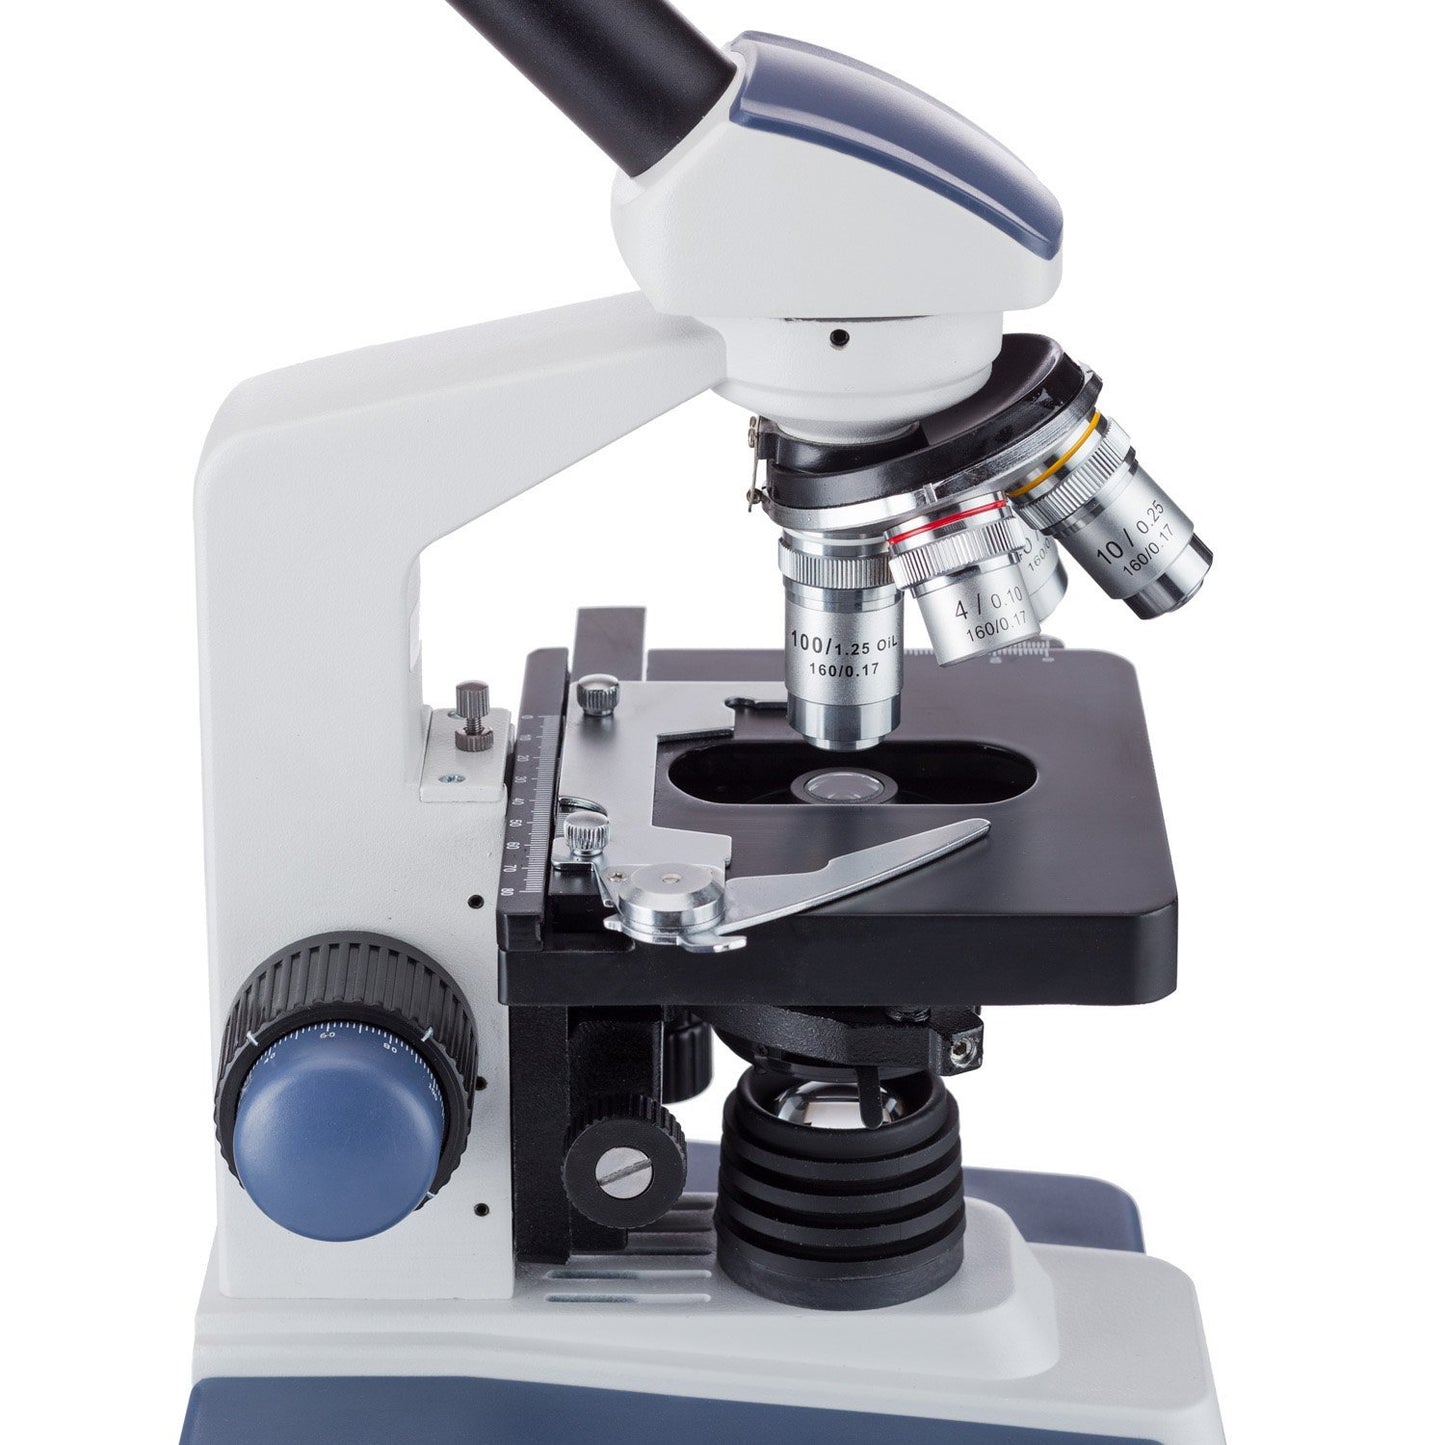 AmScope 40X-2500X LED Monocular Compound Microscope with 3D Stage